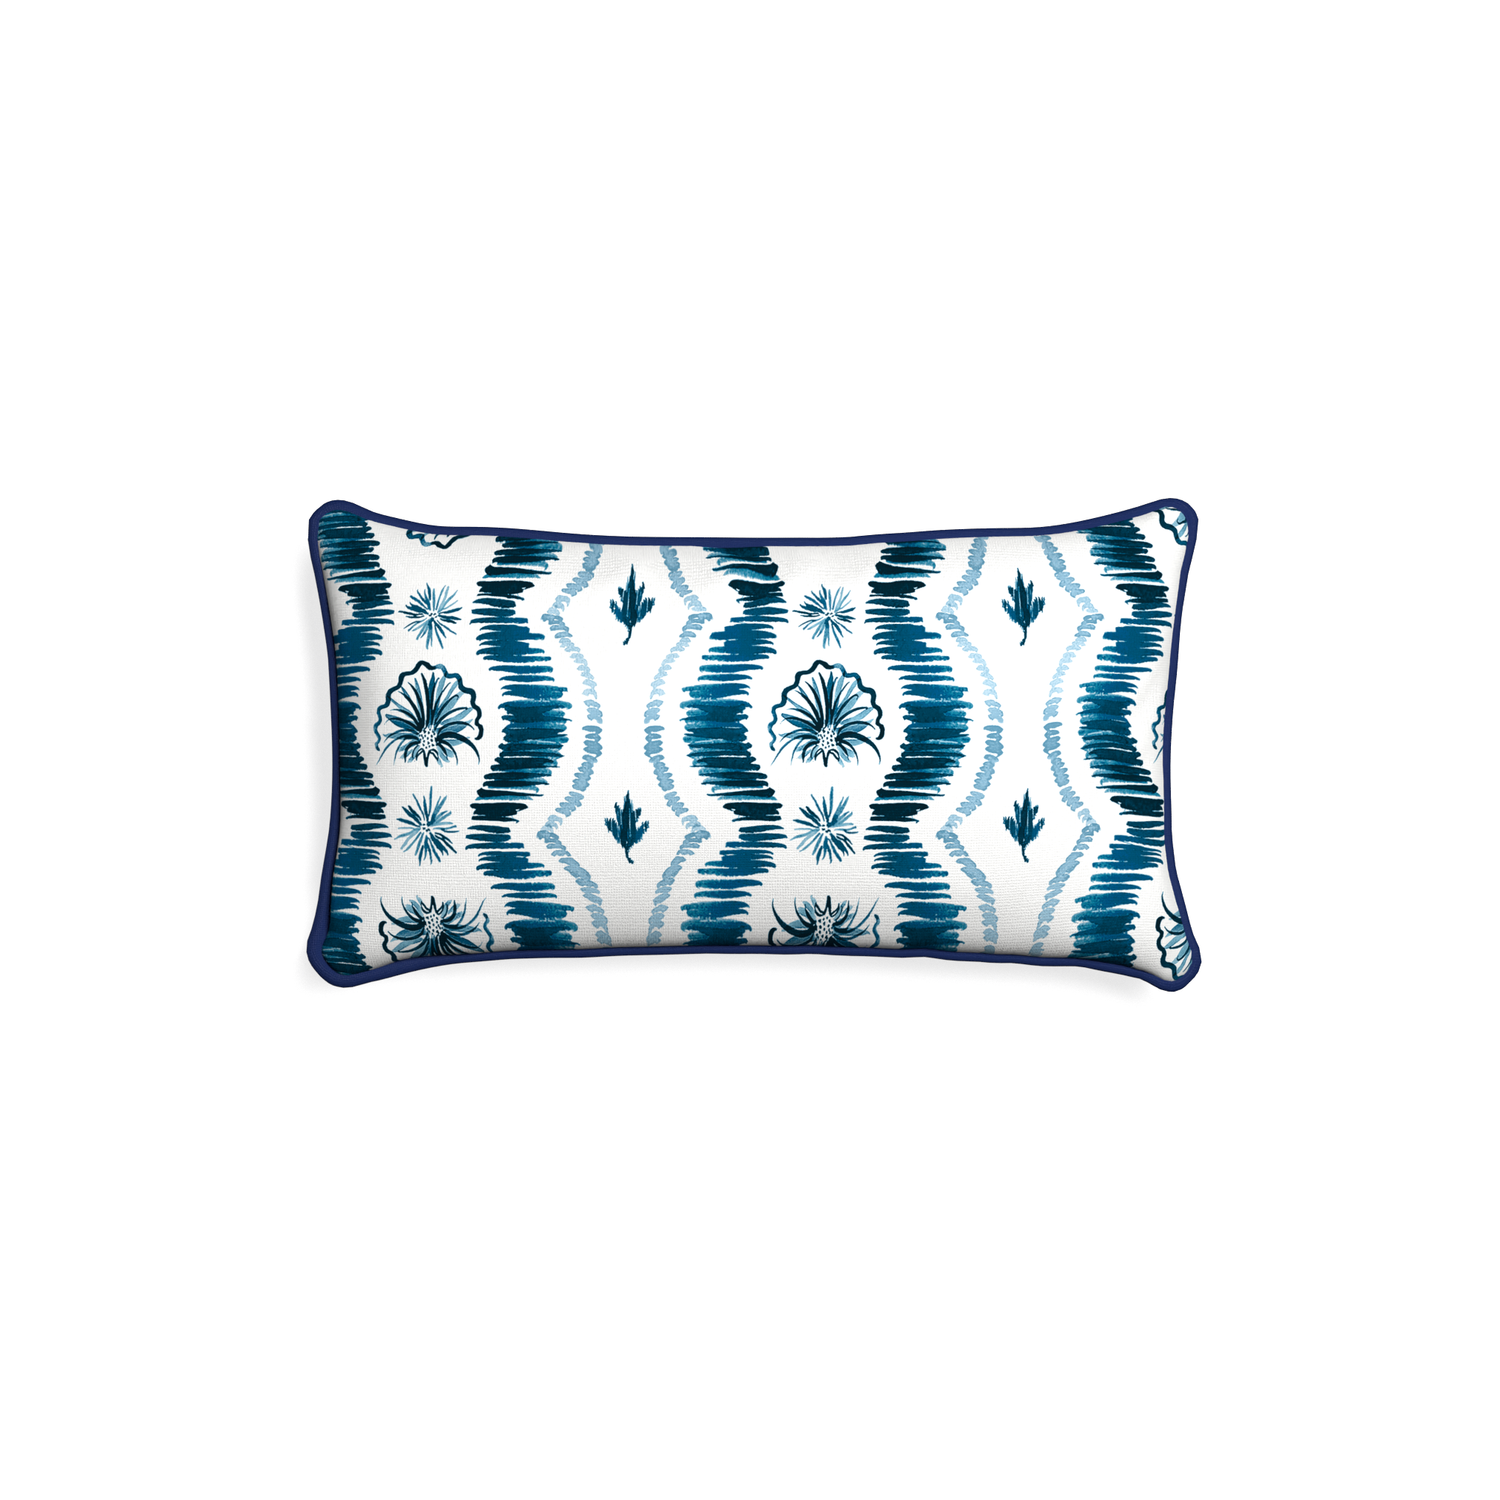 Petite-lumbar alice custom blue ikatpillow with midnight piping on white background